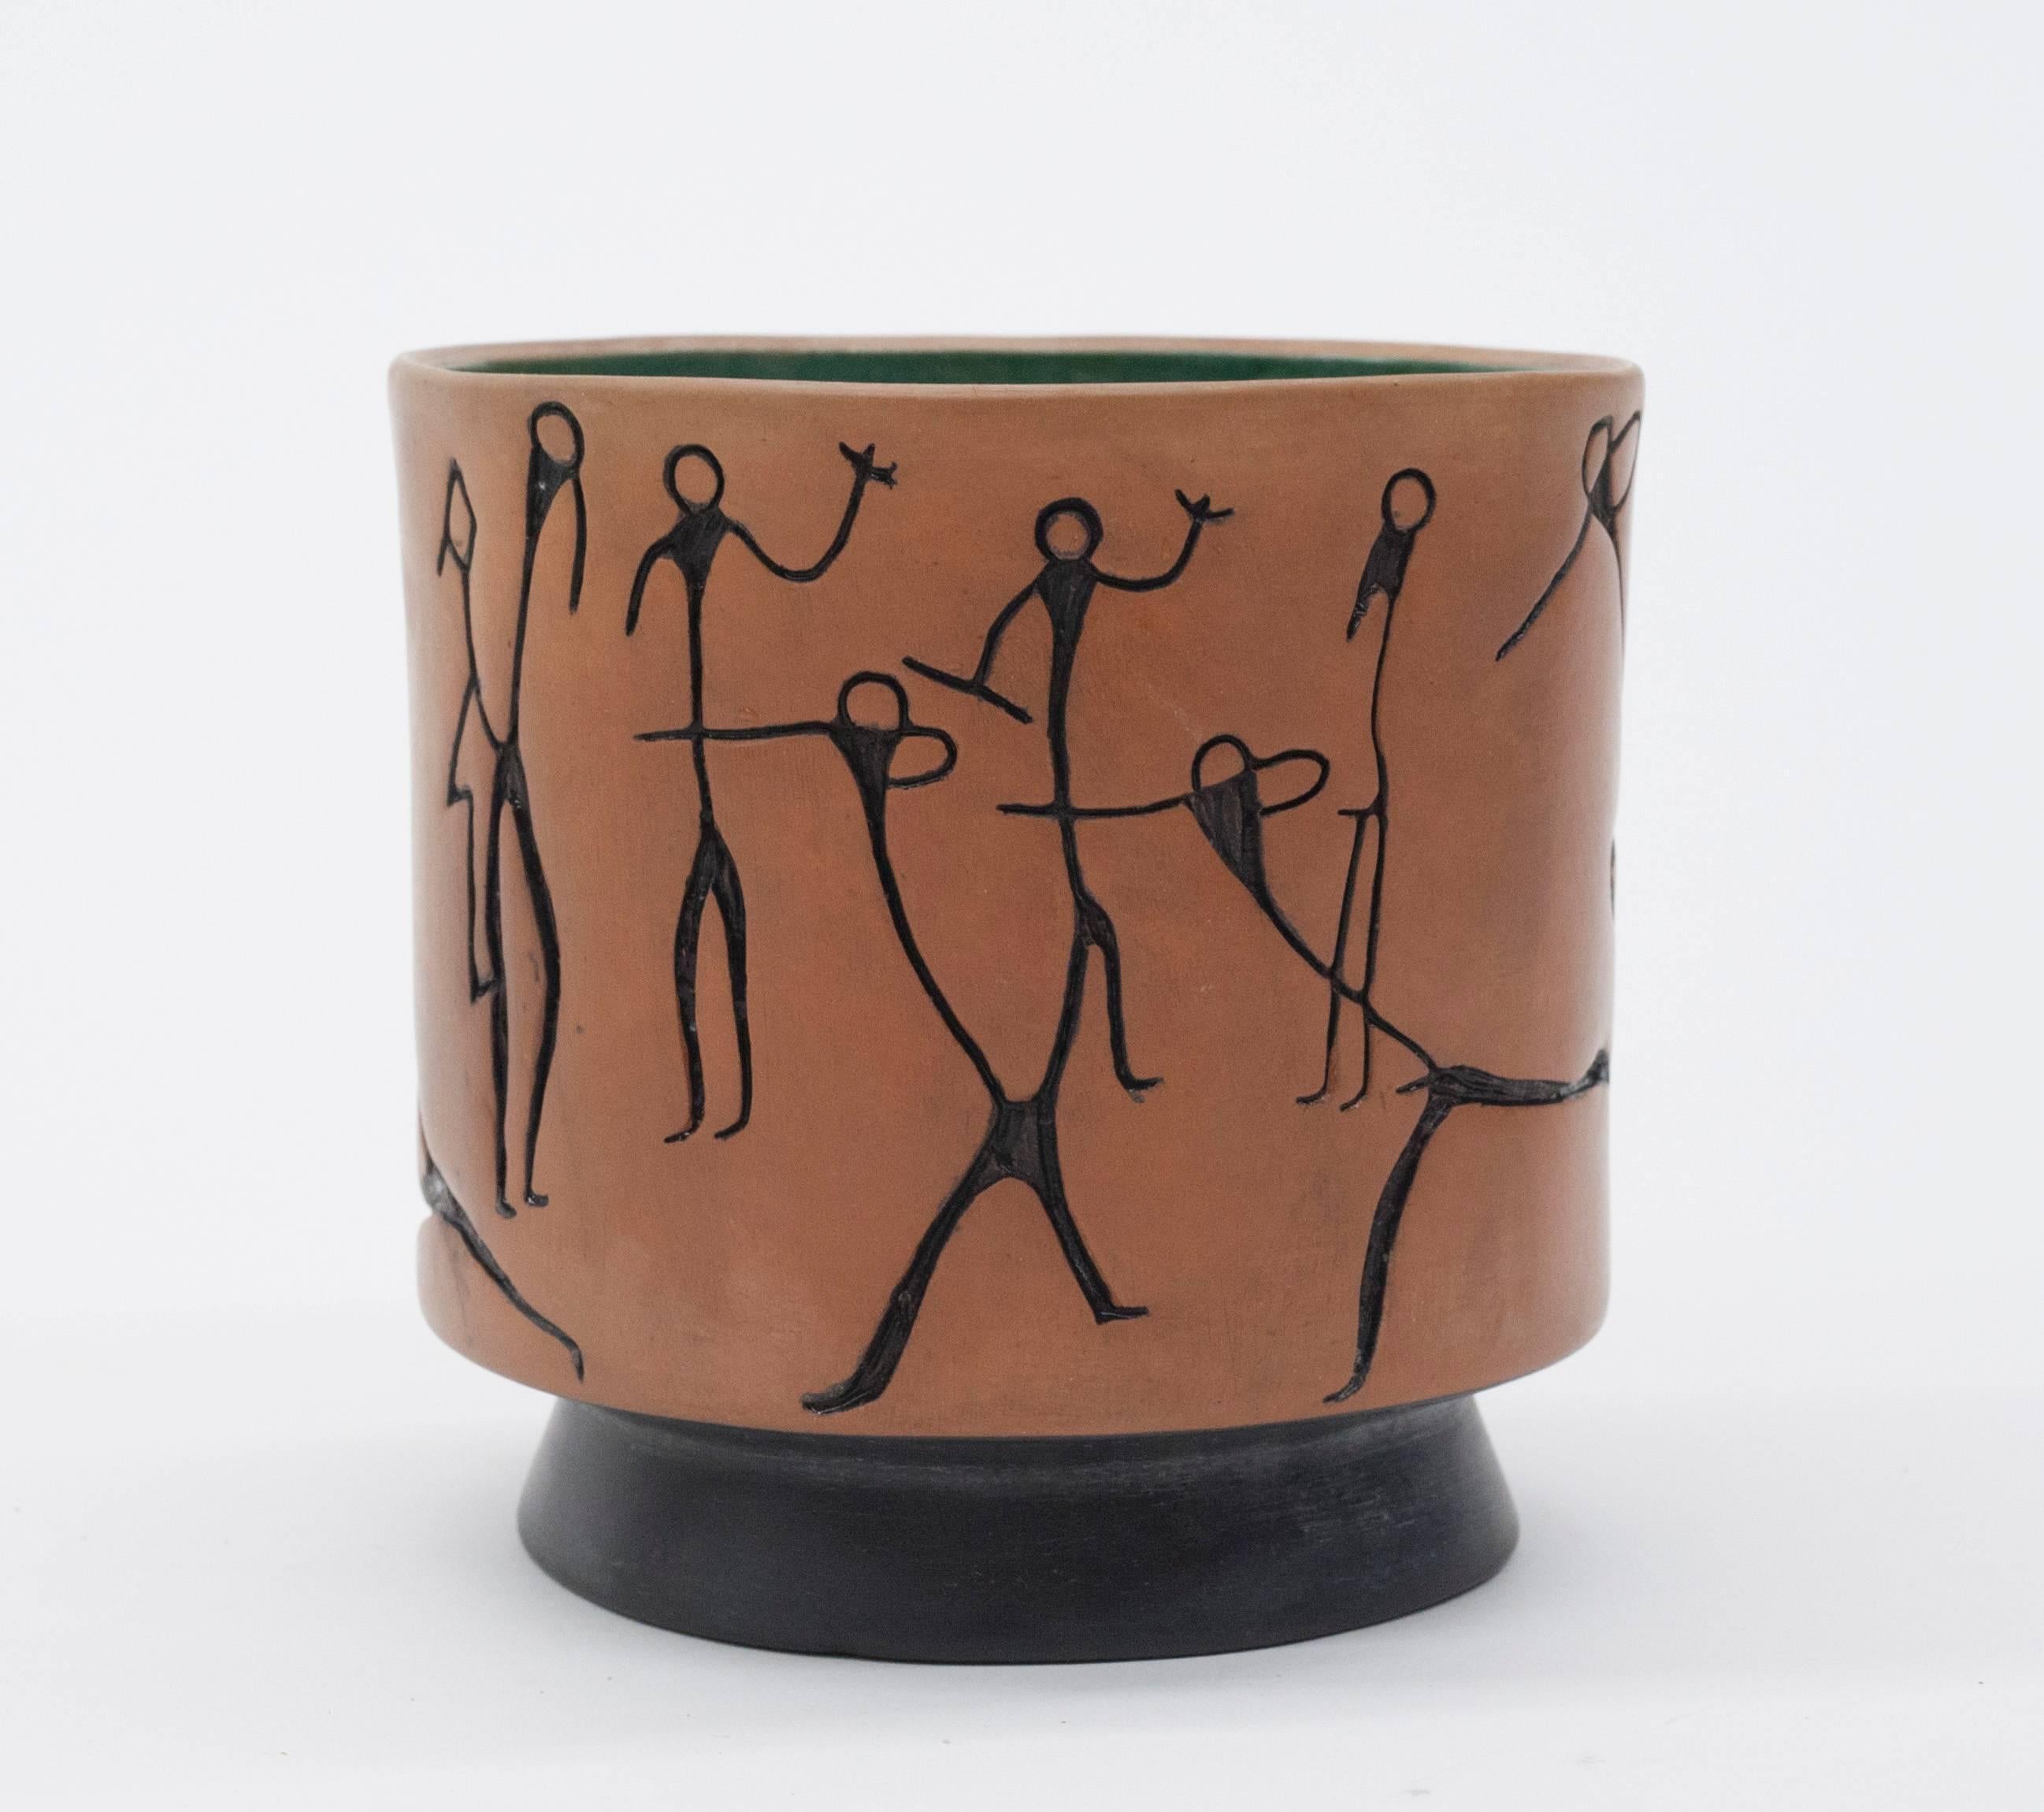 Very nice old ceramic planter from Texococo Mexico. Planter is beautifully executed with incised figures.  Figures are similar in style to some of Los Castillo's work in the 1950s. Condition is excellent with no chips or cracks. Planter measures